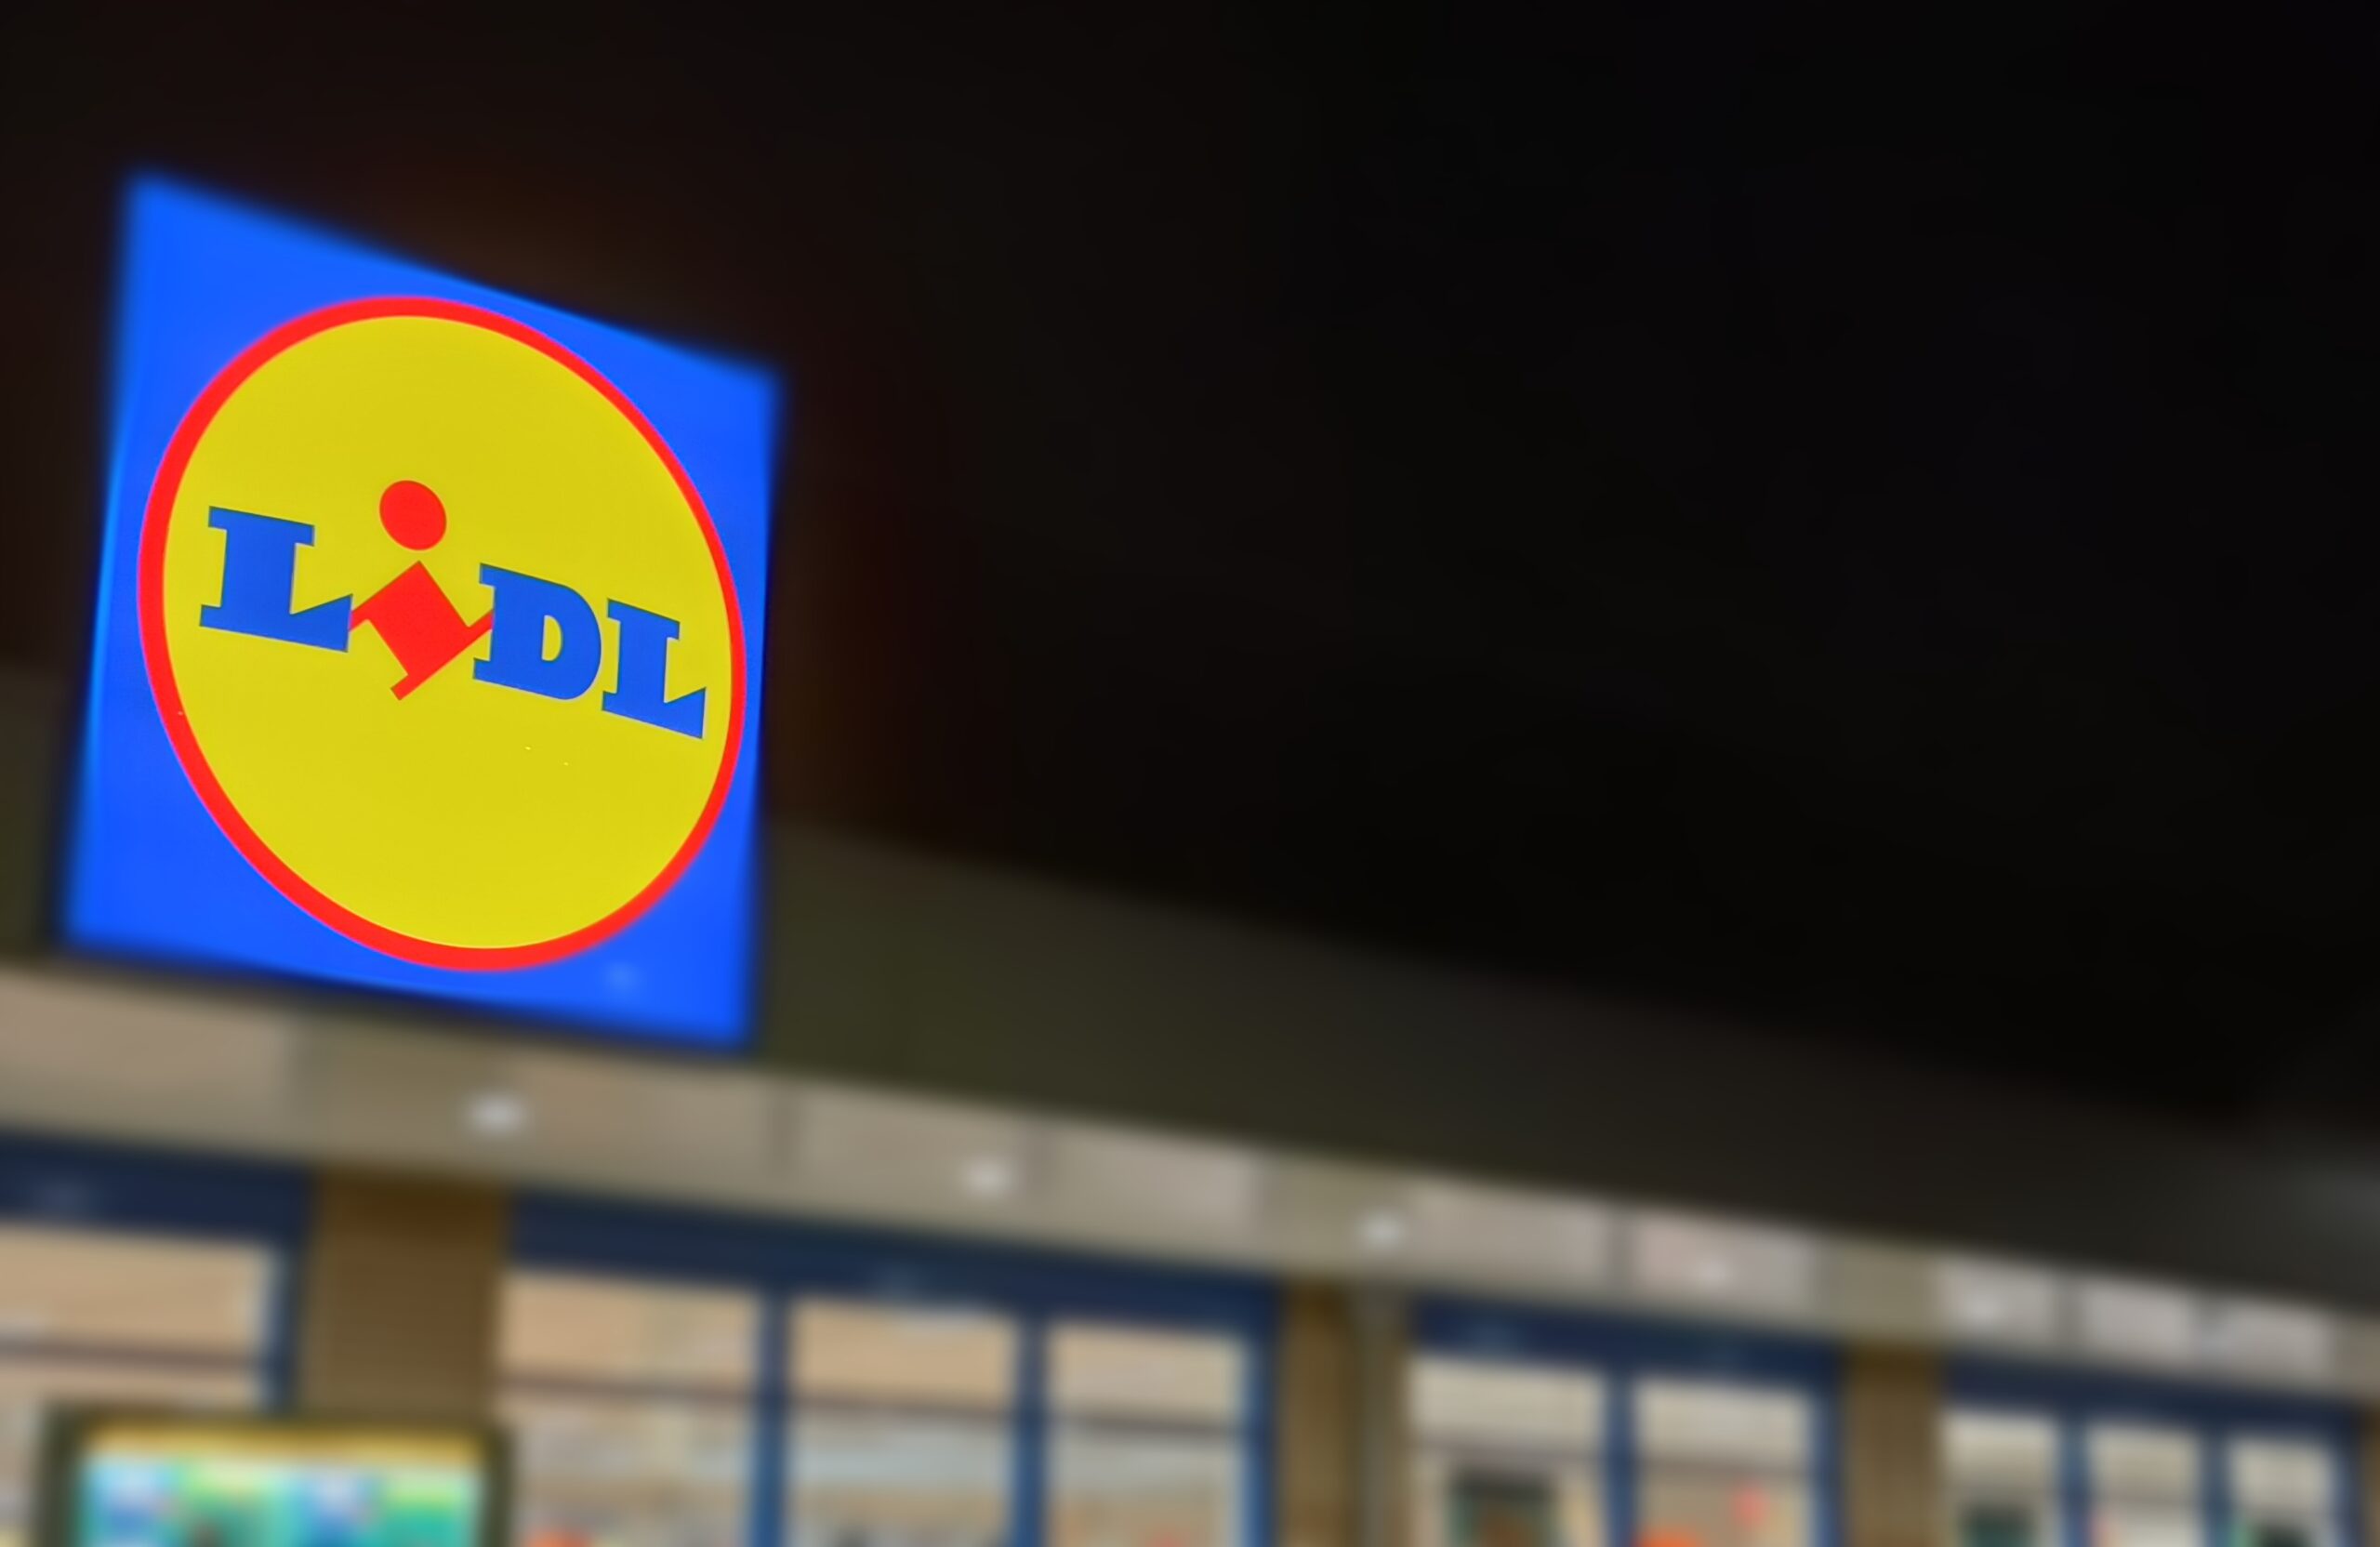 Presence of rodents discovered in LIDL Aberystwyth